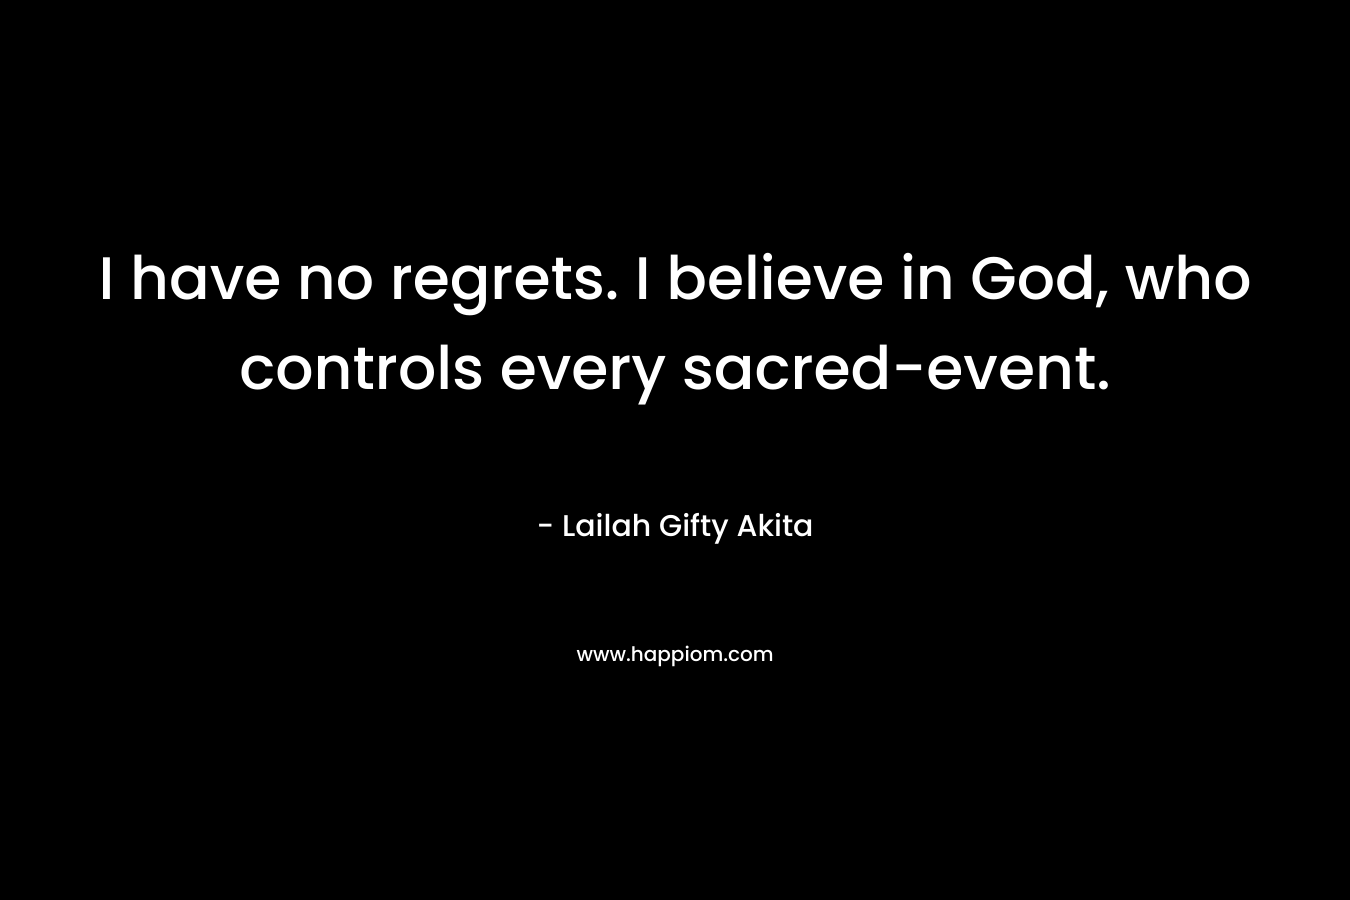 I have no regrets. I believe in God, who controls every sacred-event.